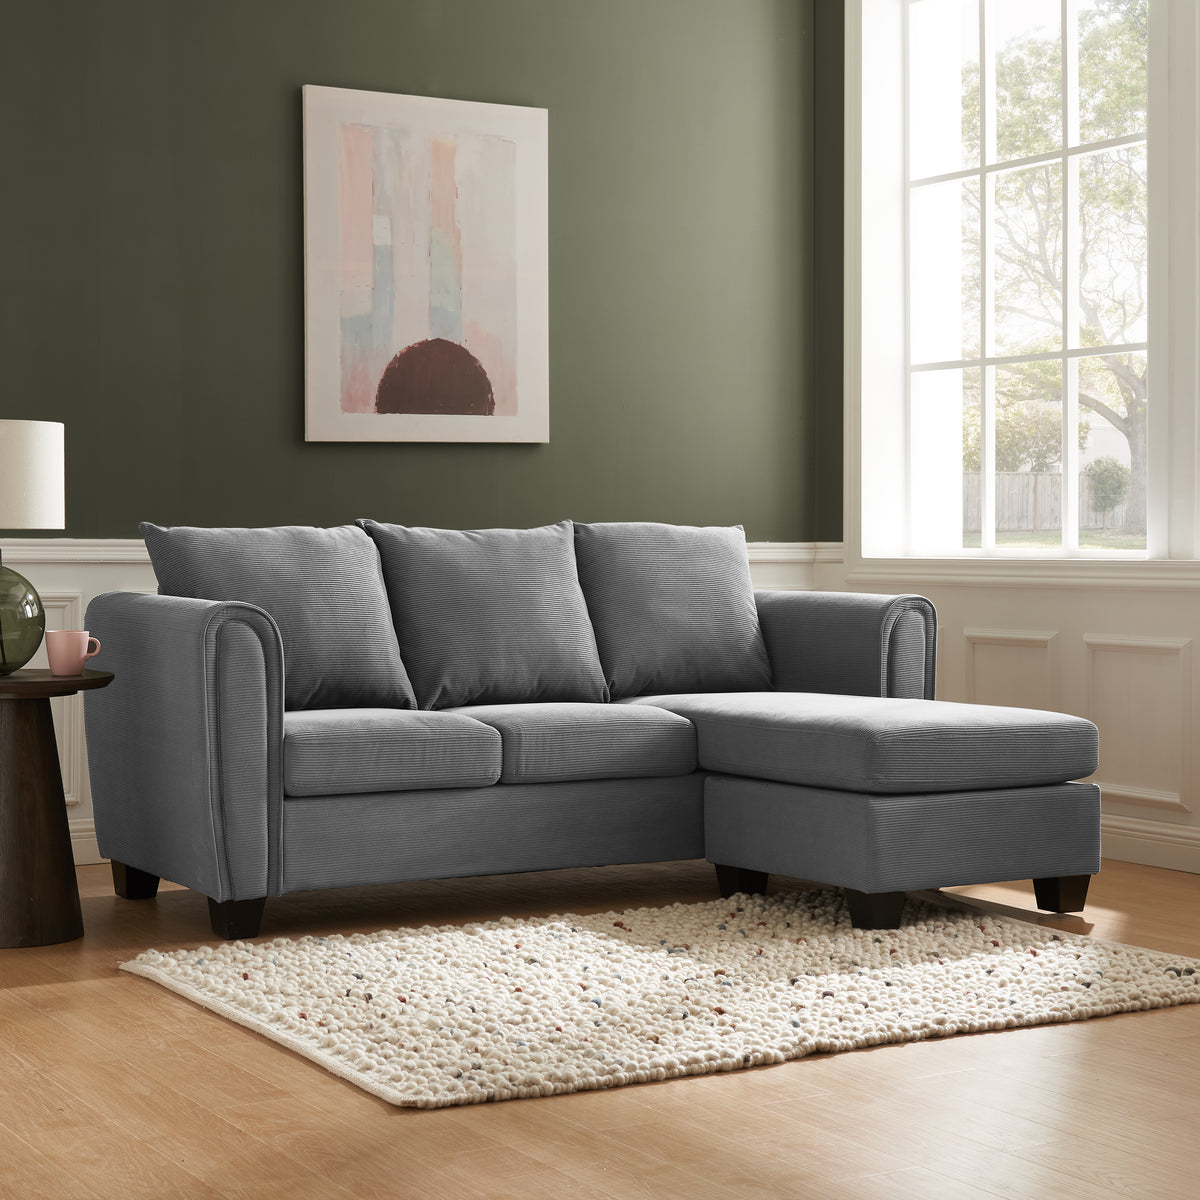 Halena 3 Seater Sofa With Chaise - Grey Cord | Home Detail UK